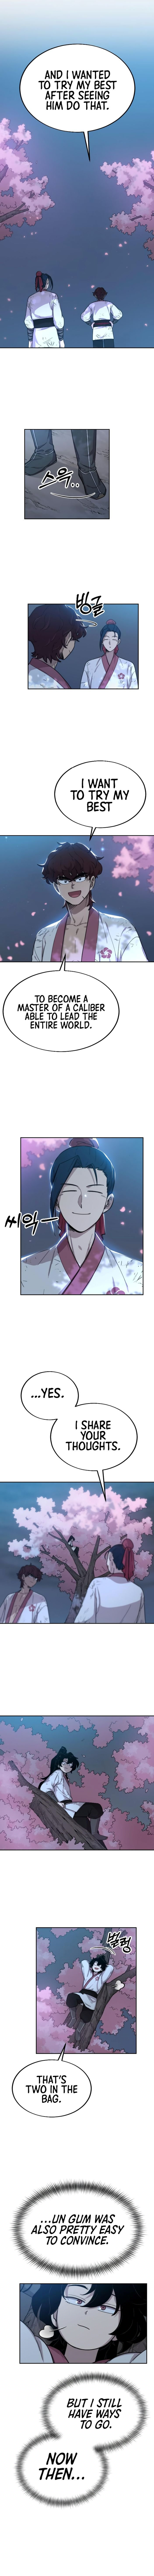 Return of the Flowery Mountain Sect chapter 5